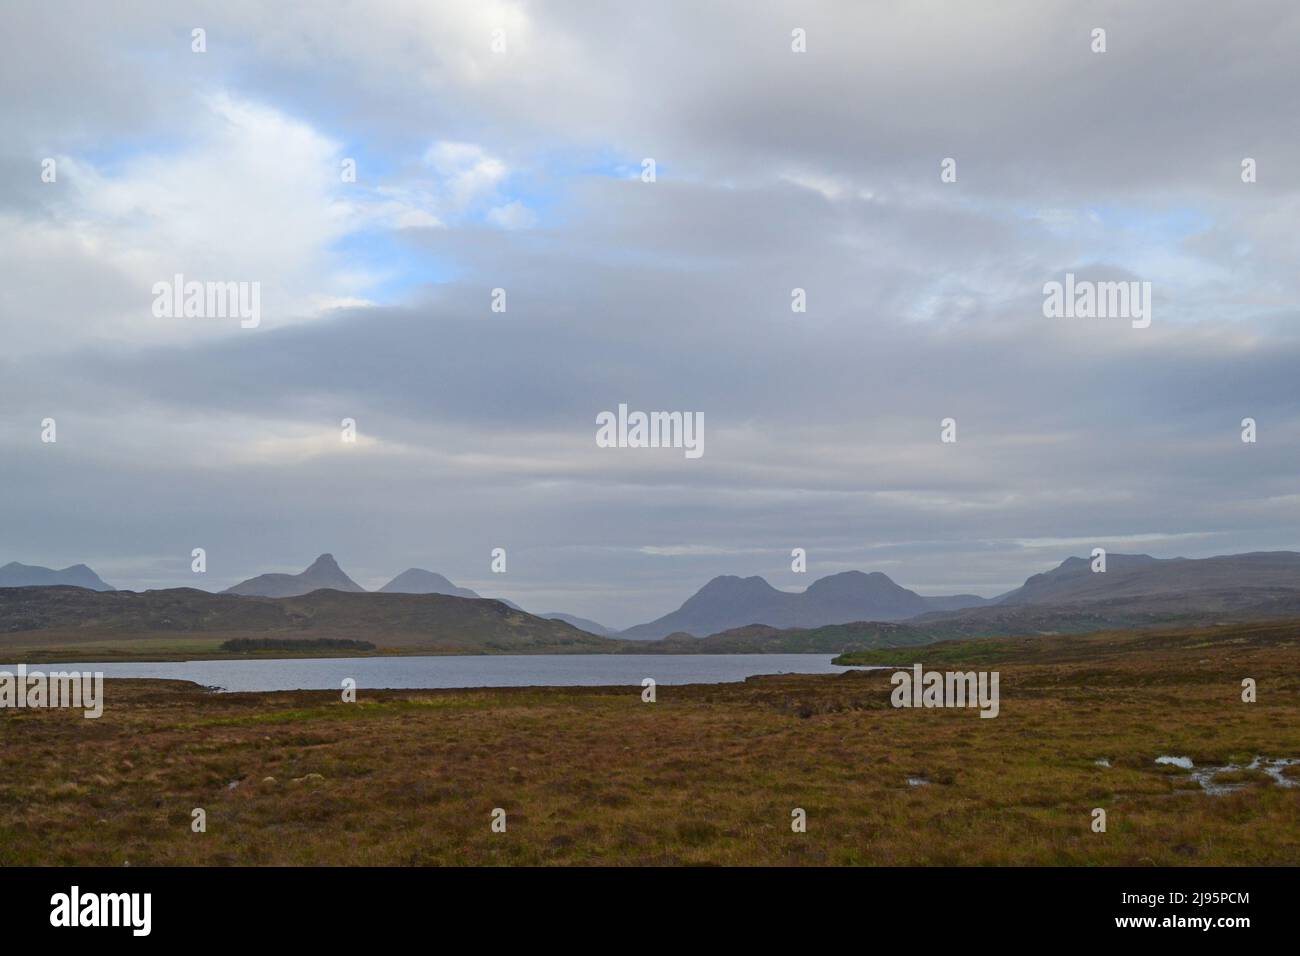 Wild mountain scenery in NW Scotland. Stac Poillaidh, on left, Cul Mor, on right, early evening, Scotland's Monument Valley, lonely wilderness Stock Photo